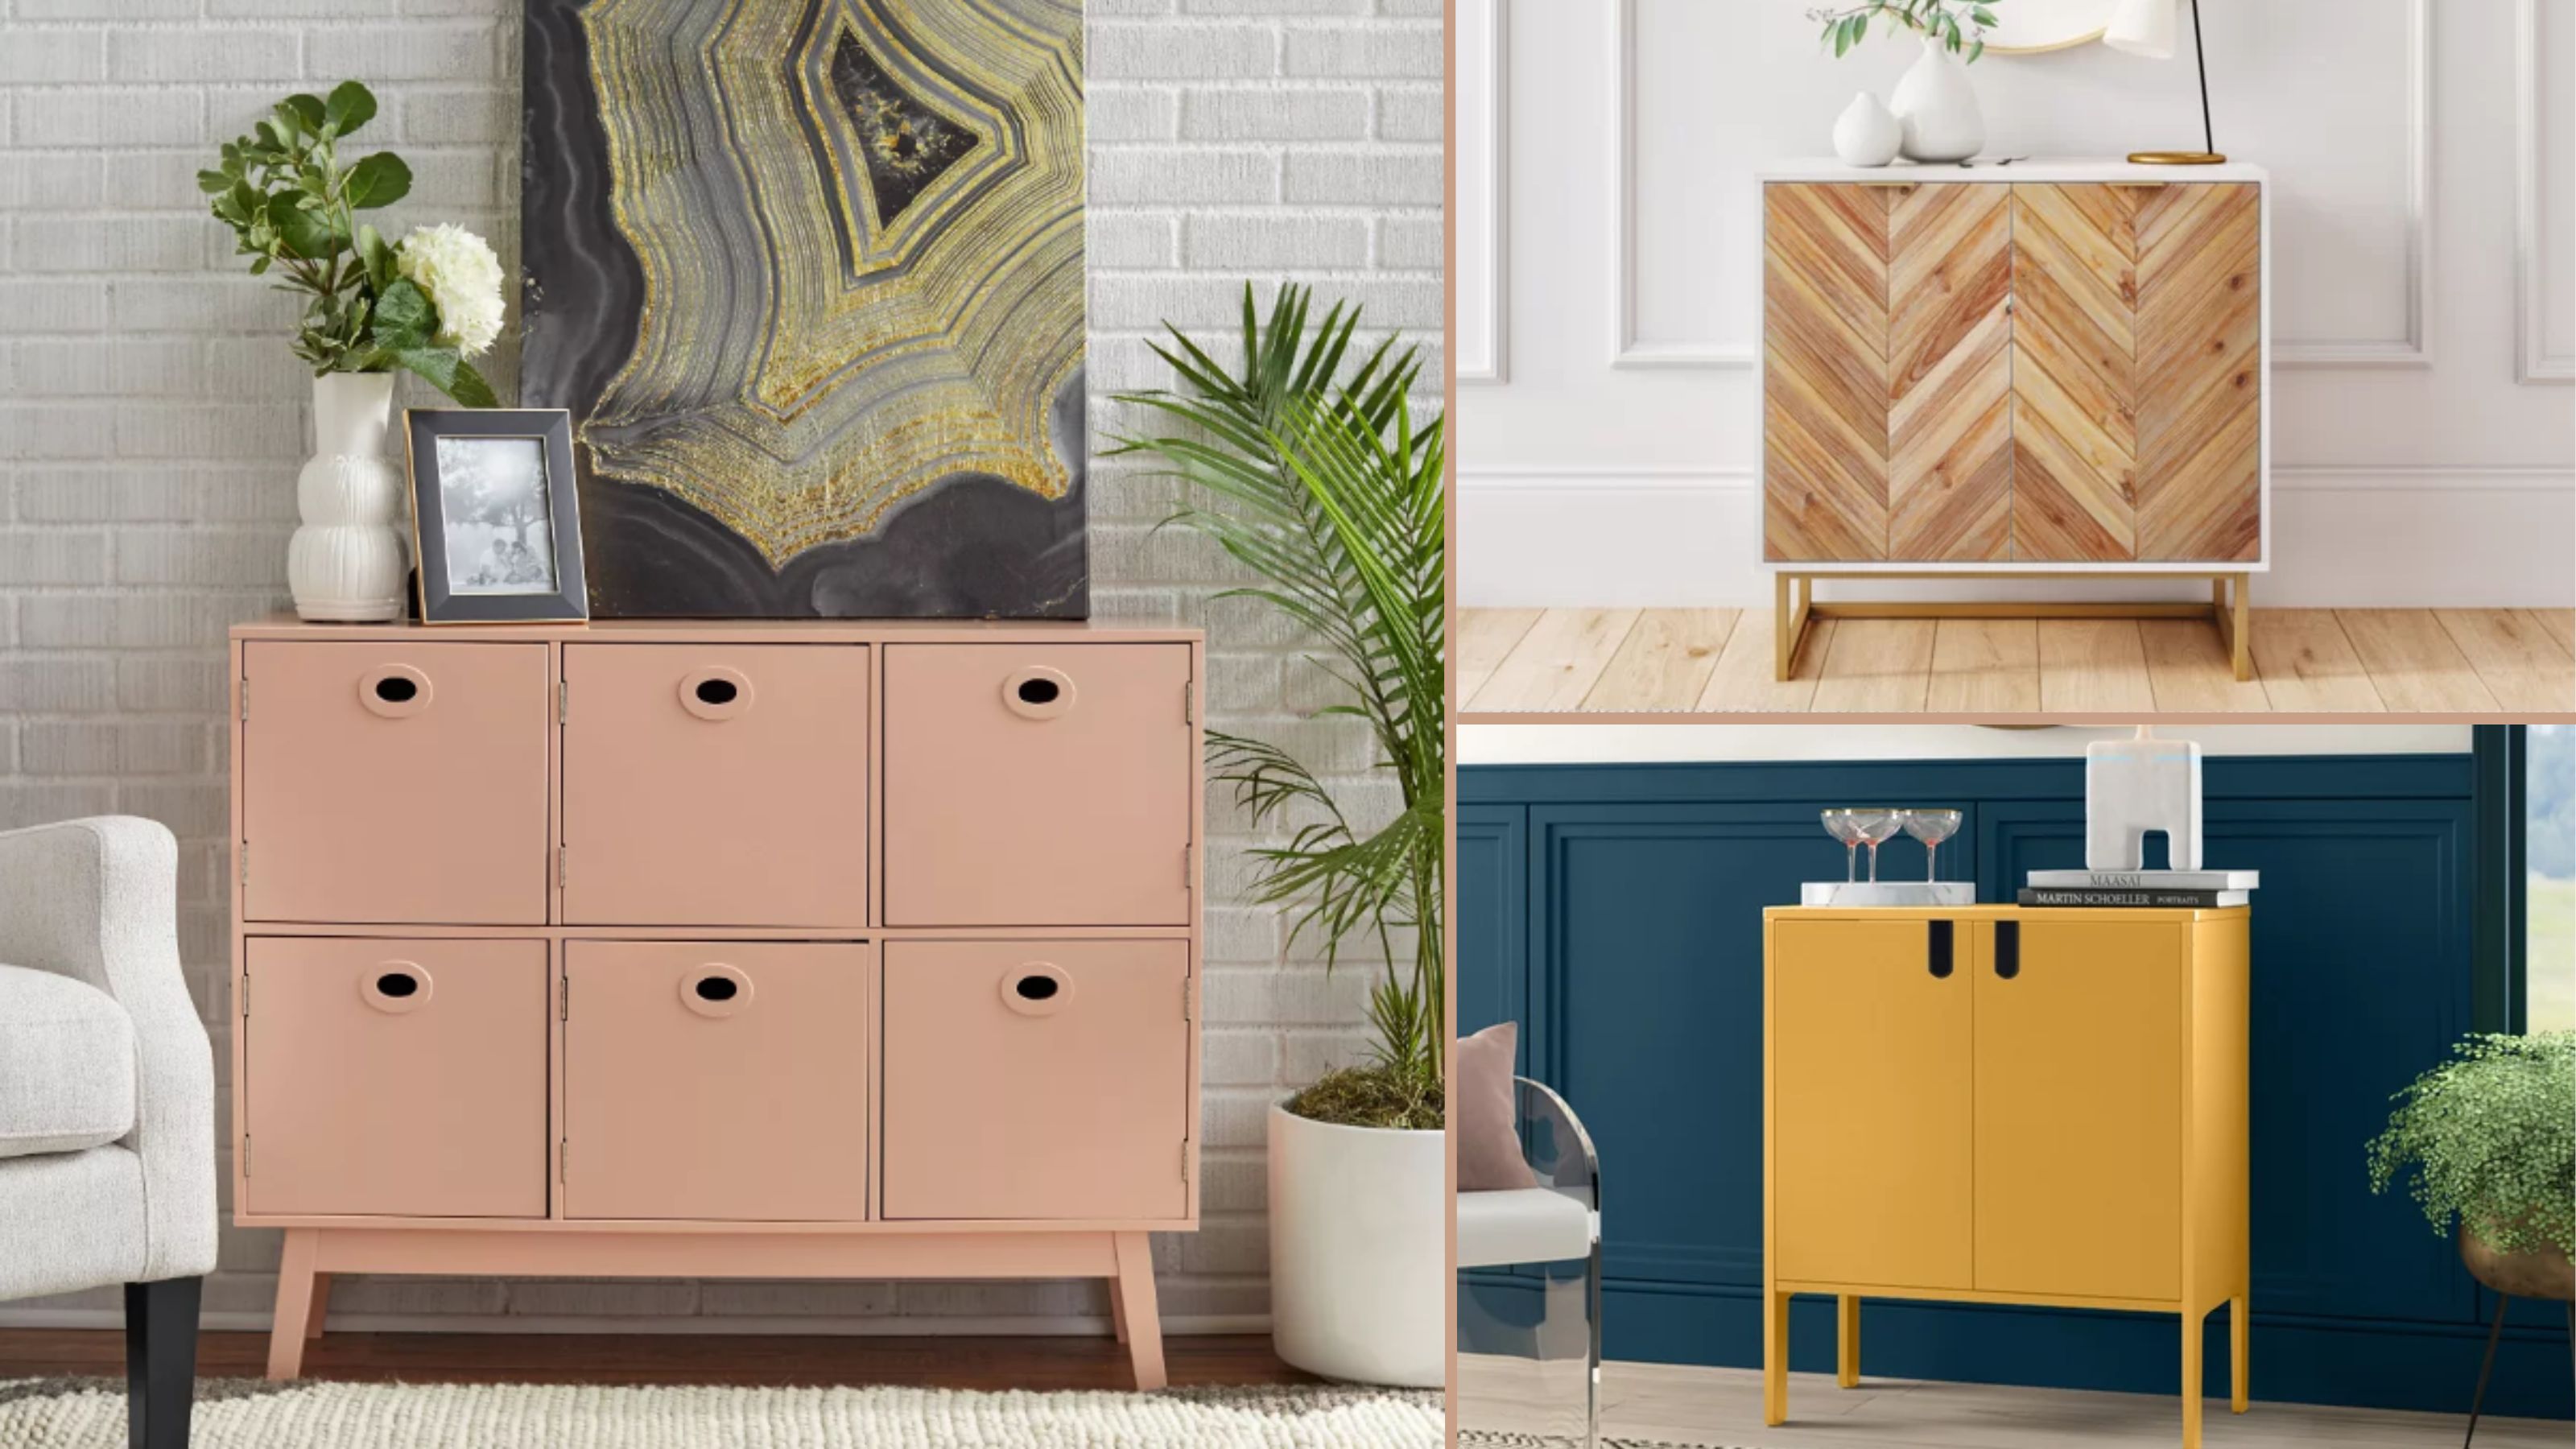 Small storage cabinets: 9 stylish picks for a teeny space